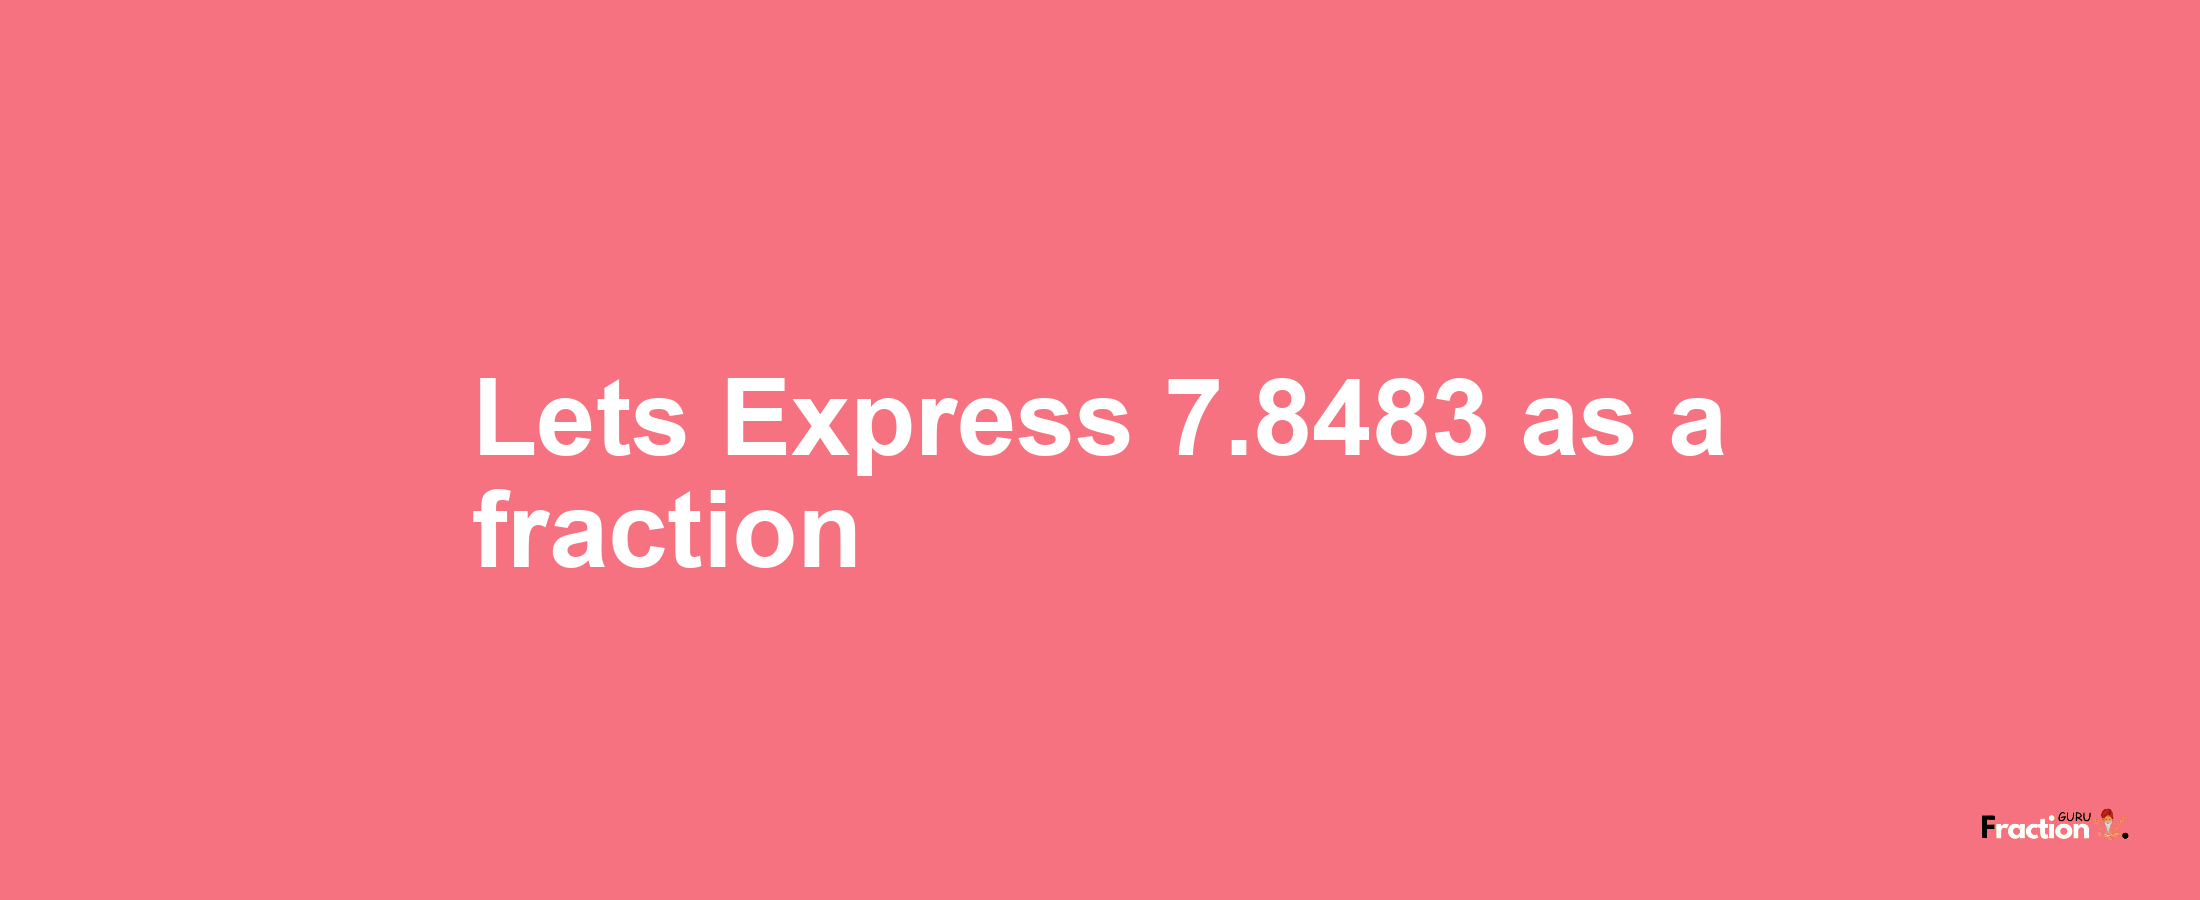 Lets Express 7.8483 as afraction